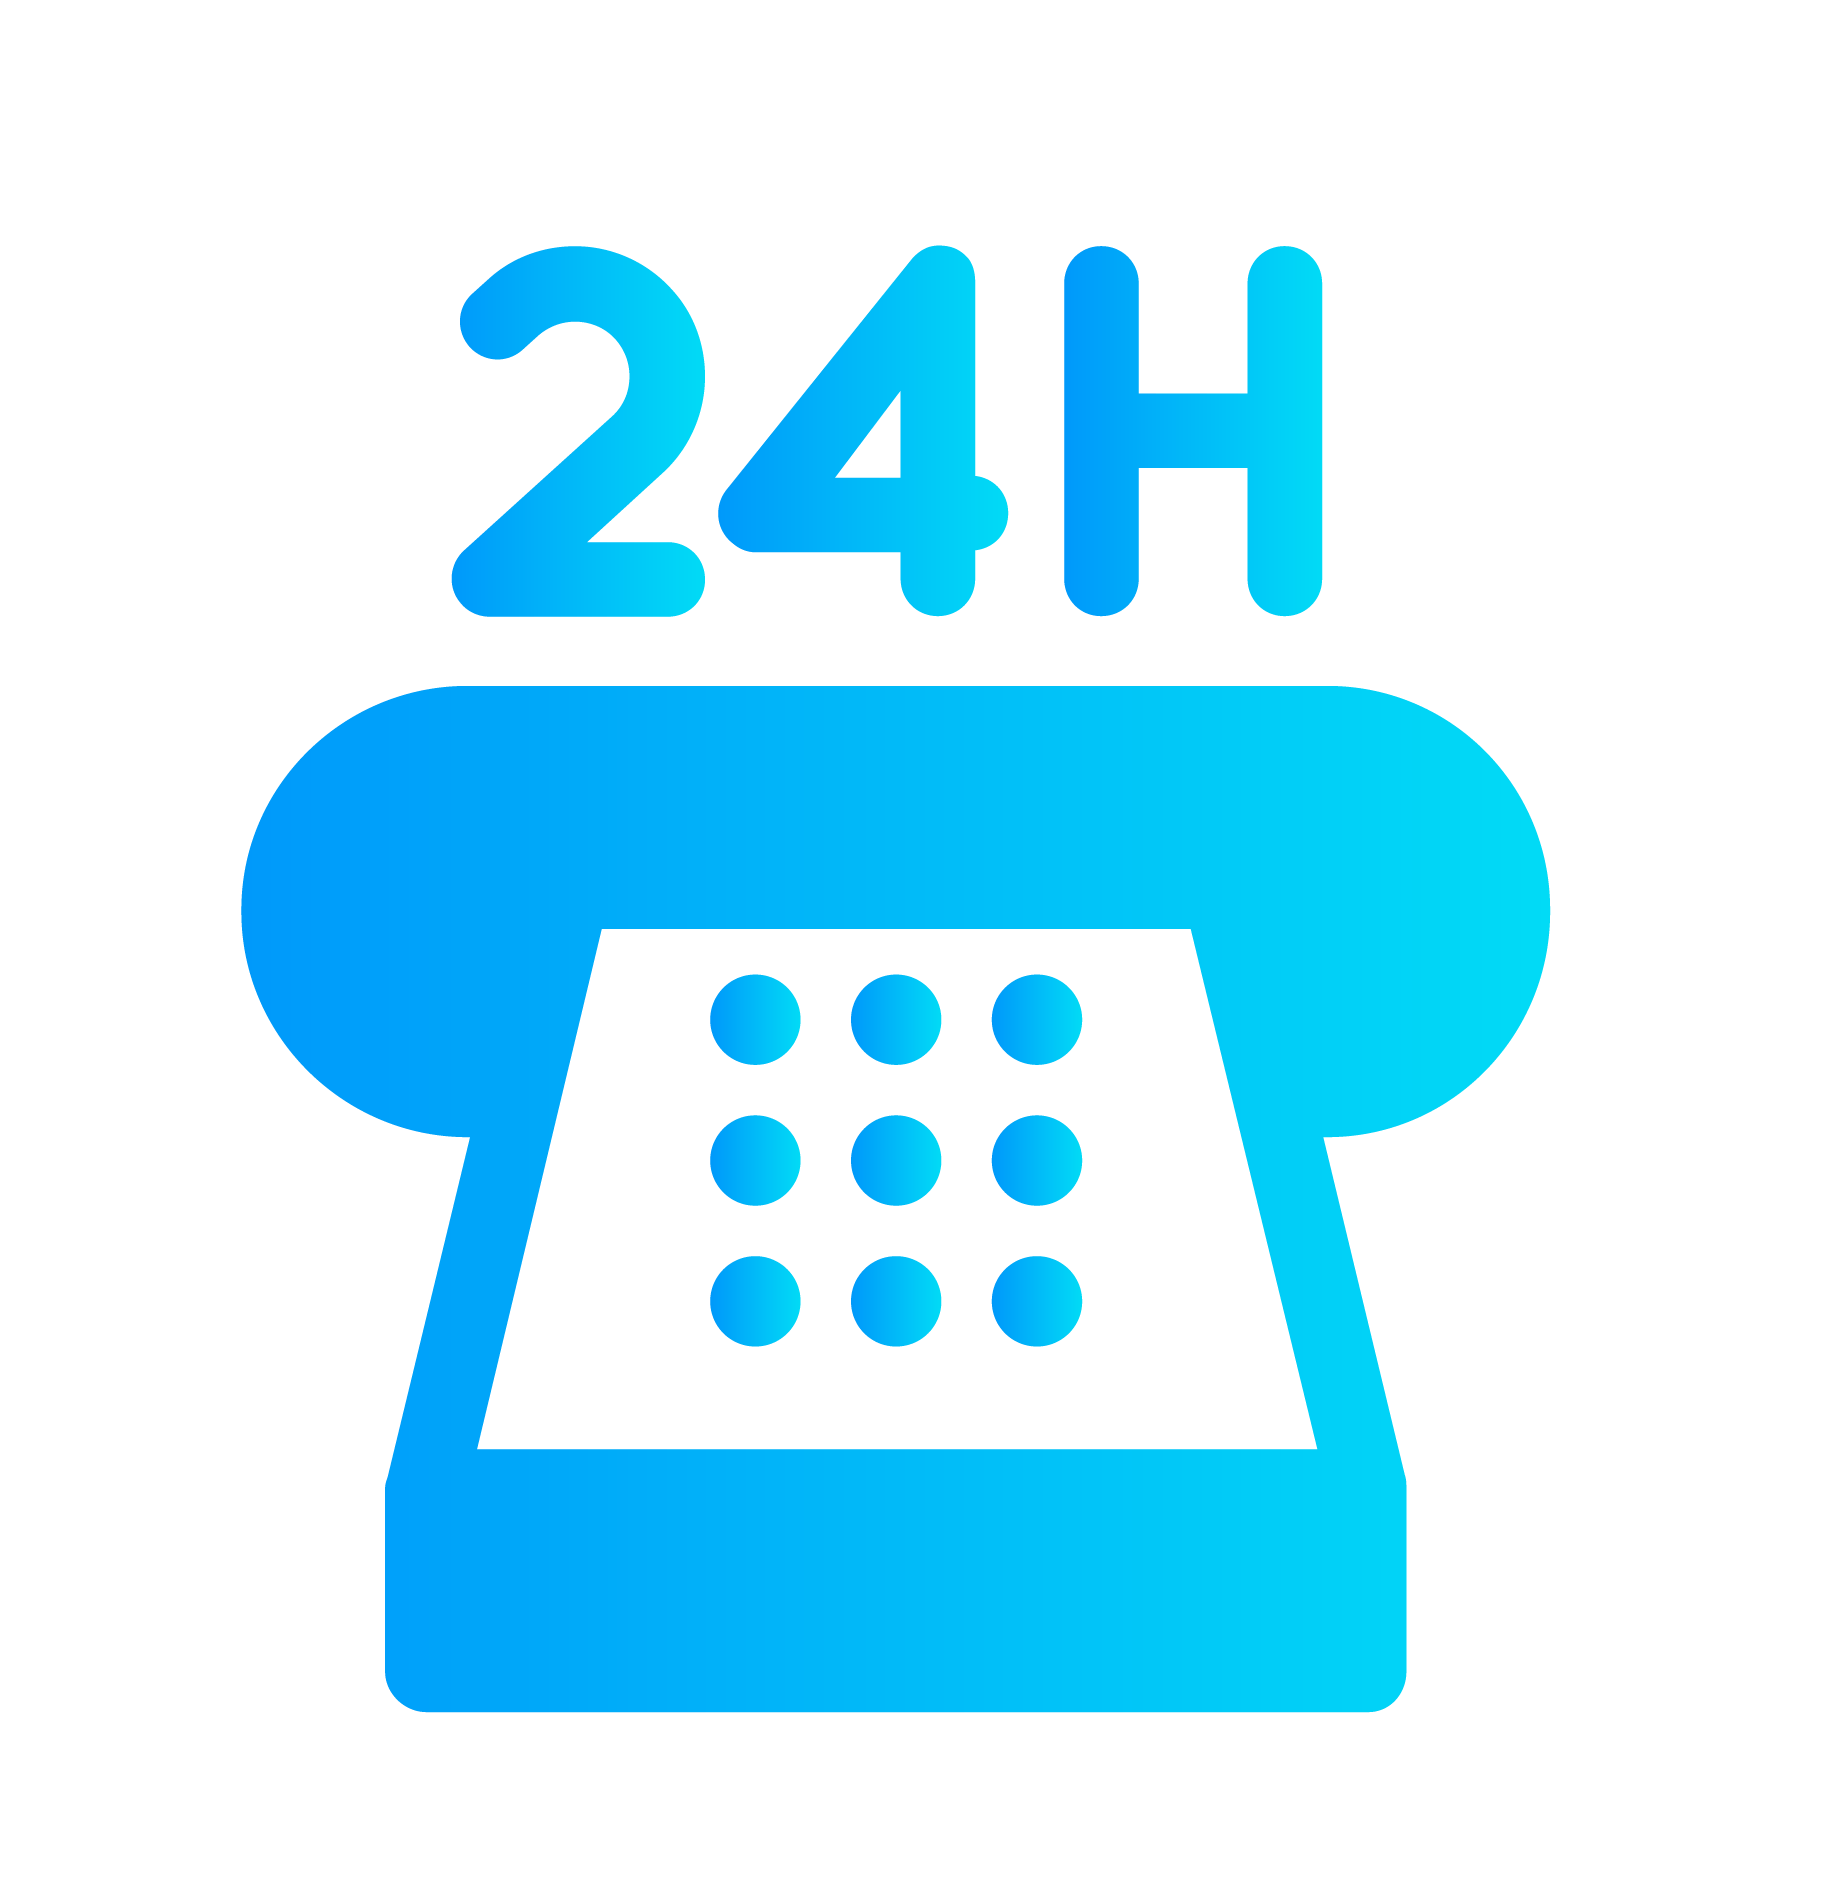 24/7 self service support centers